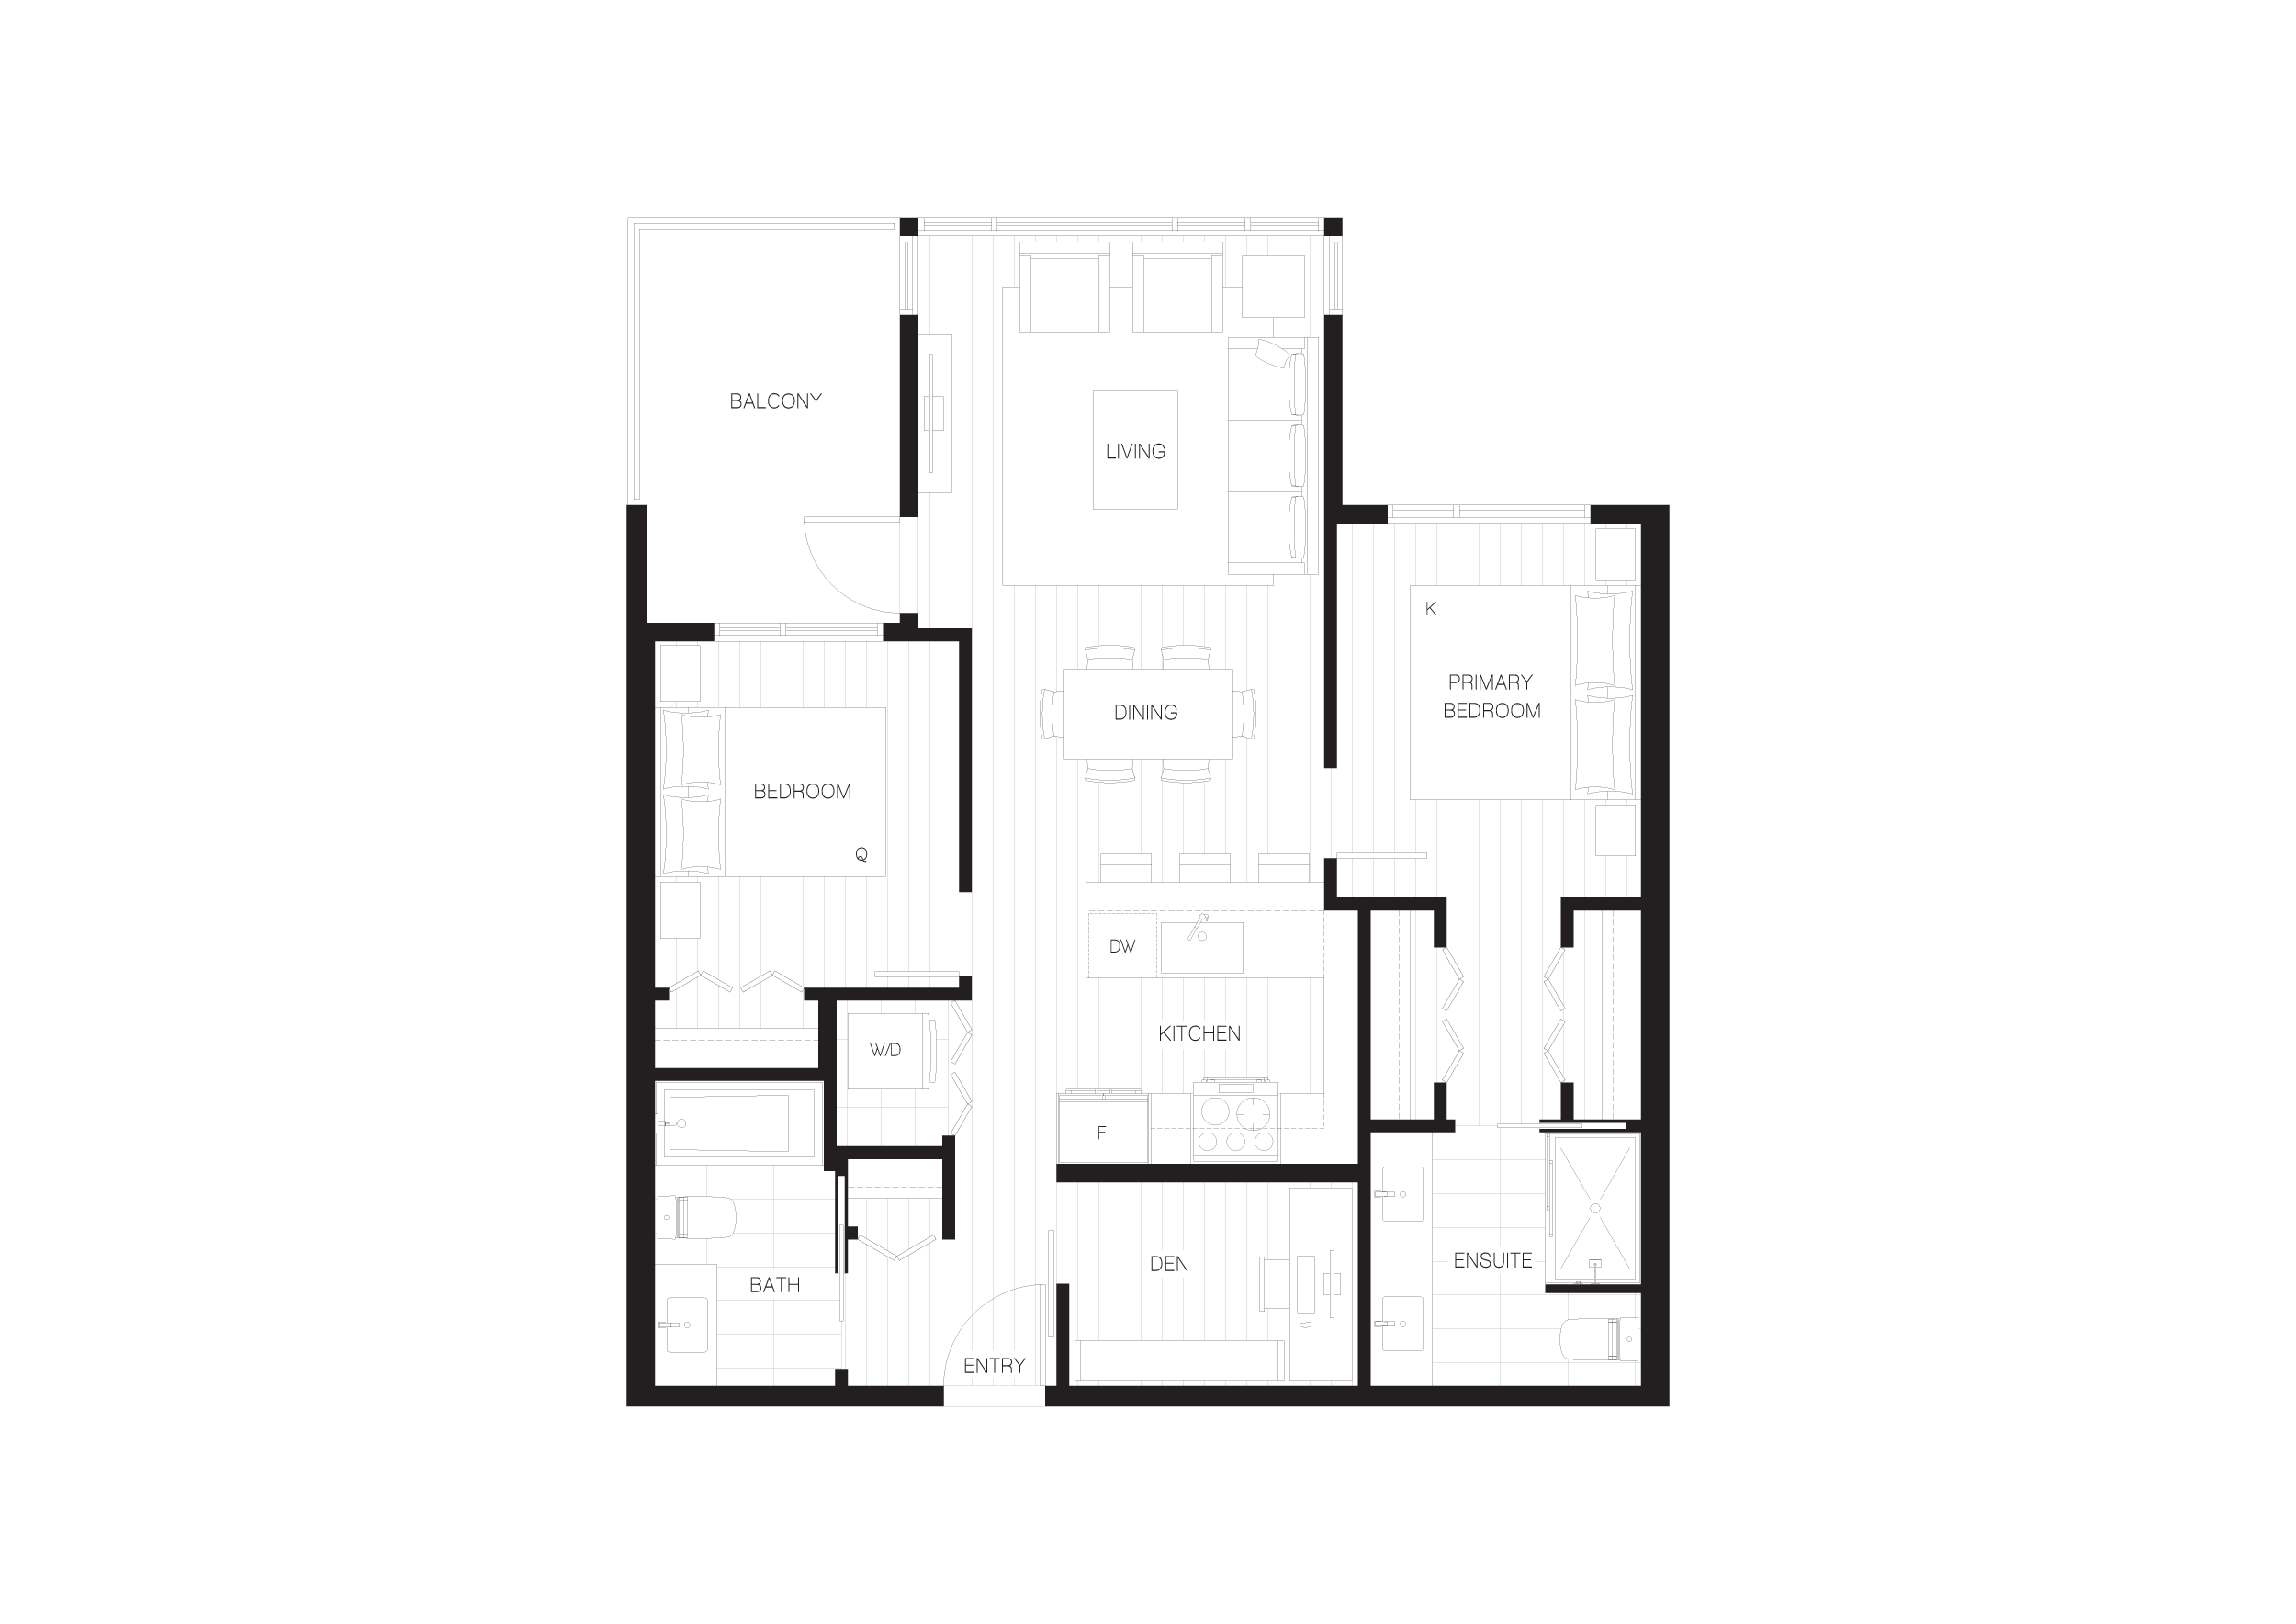  Floor Plan of Rove Condos with undefined beds